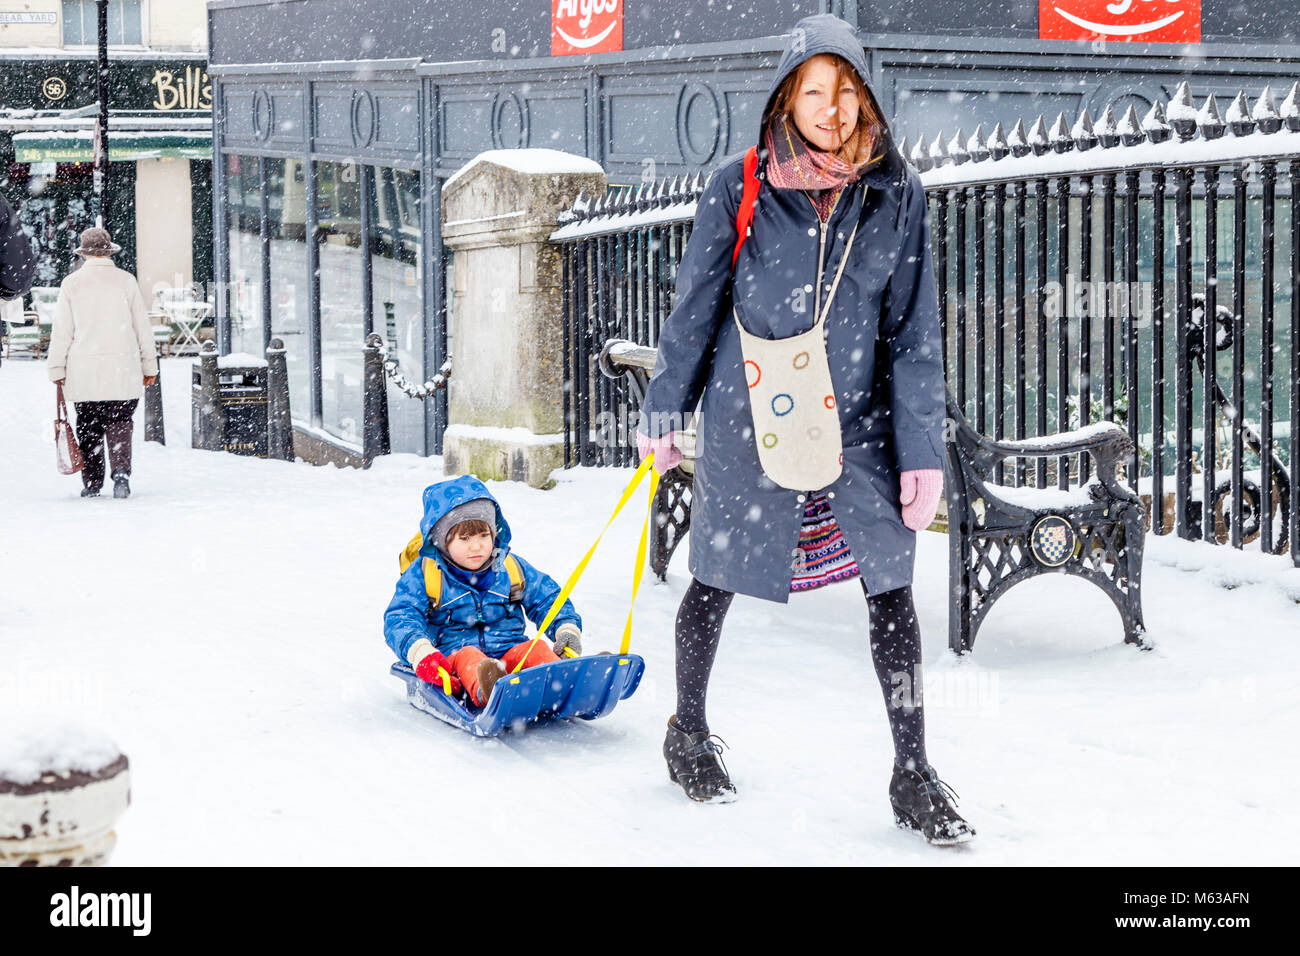 A local woman pulling a child on a sledge, High Street, Lewes, East Sussex, UK Stock Photo